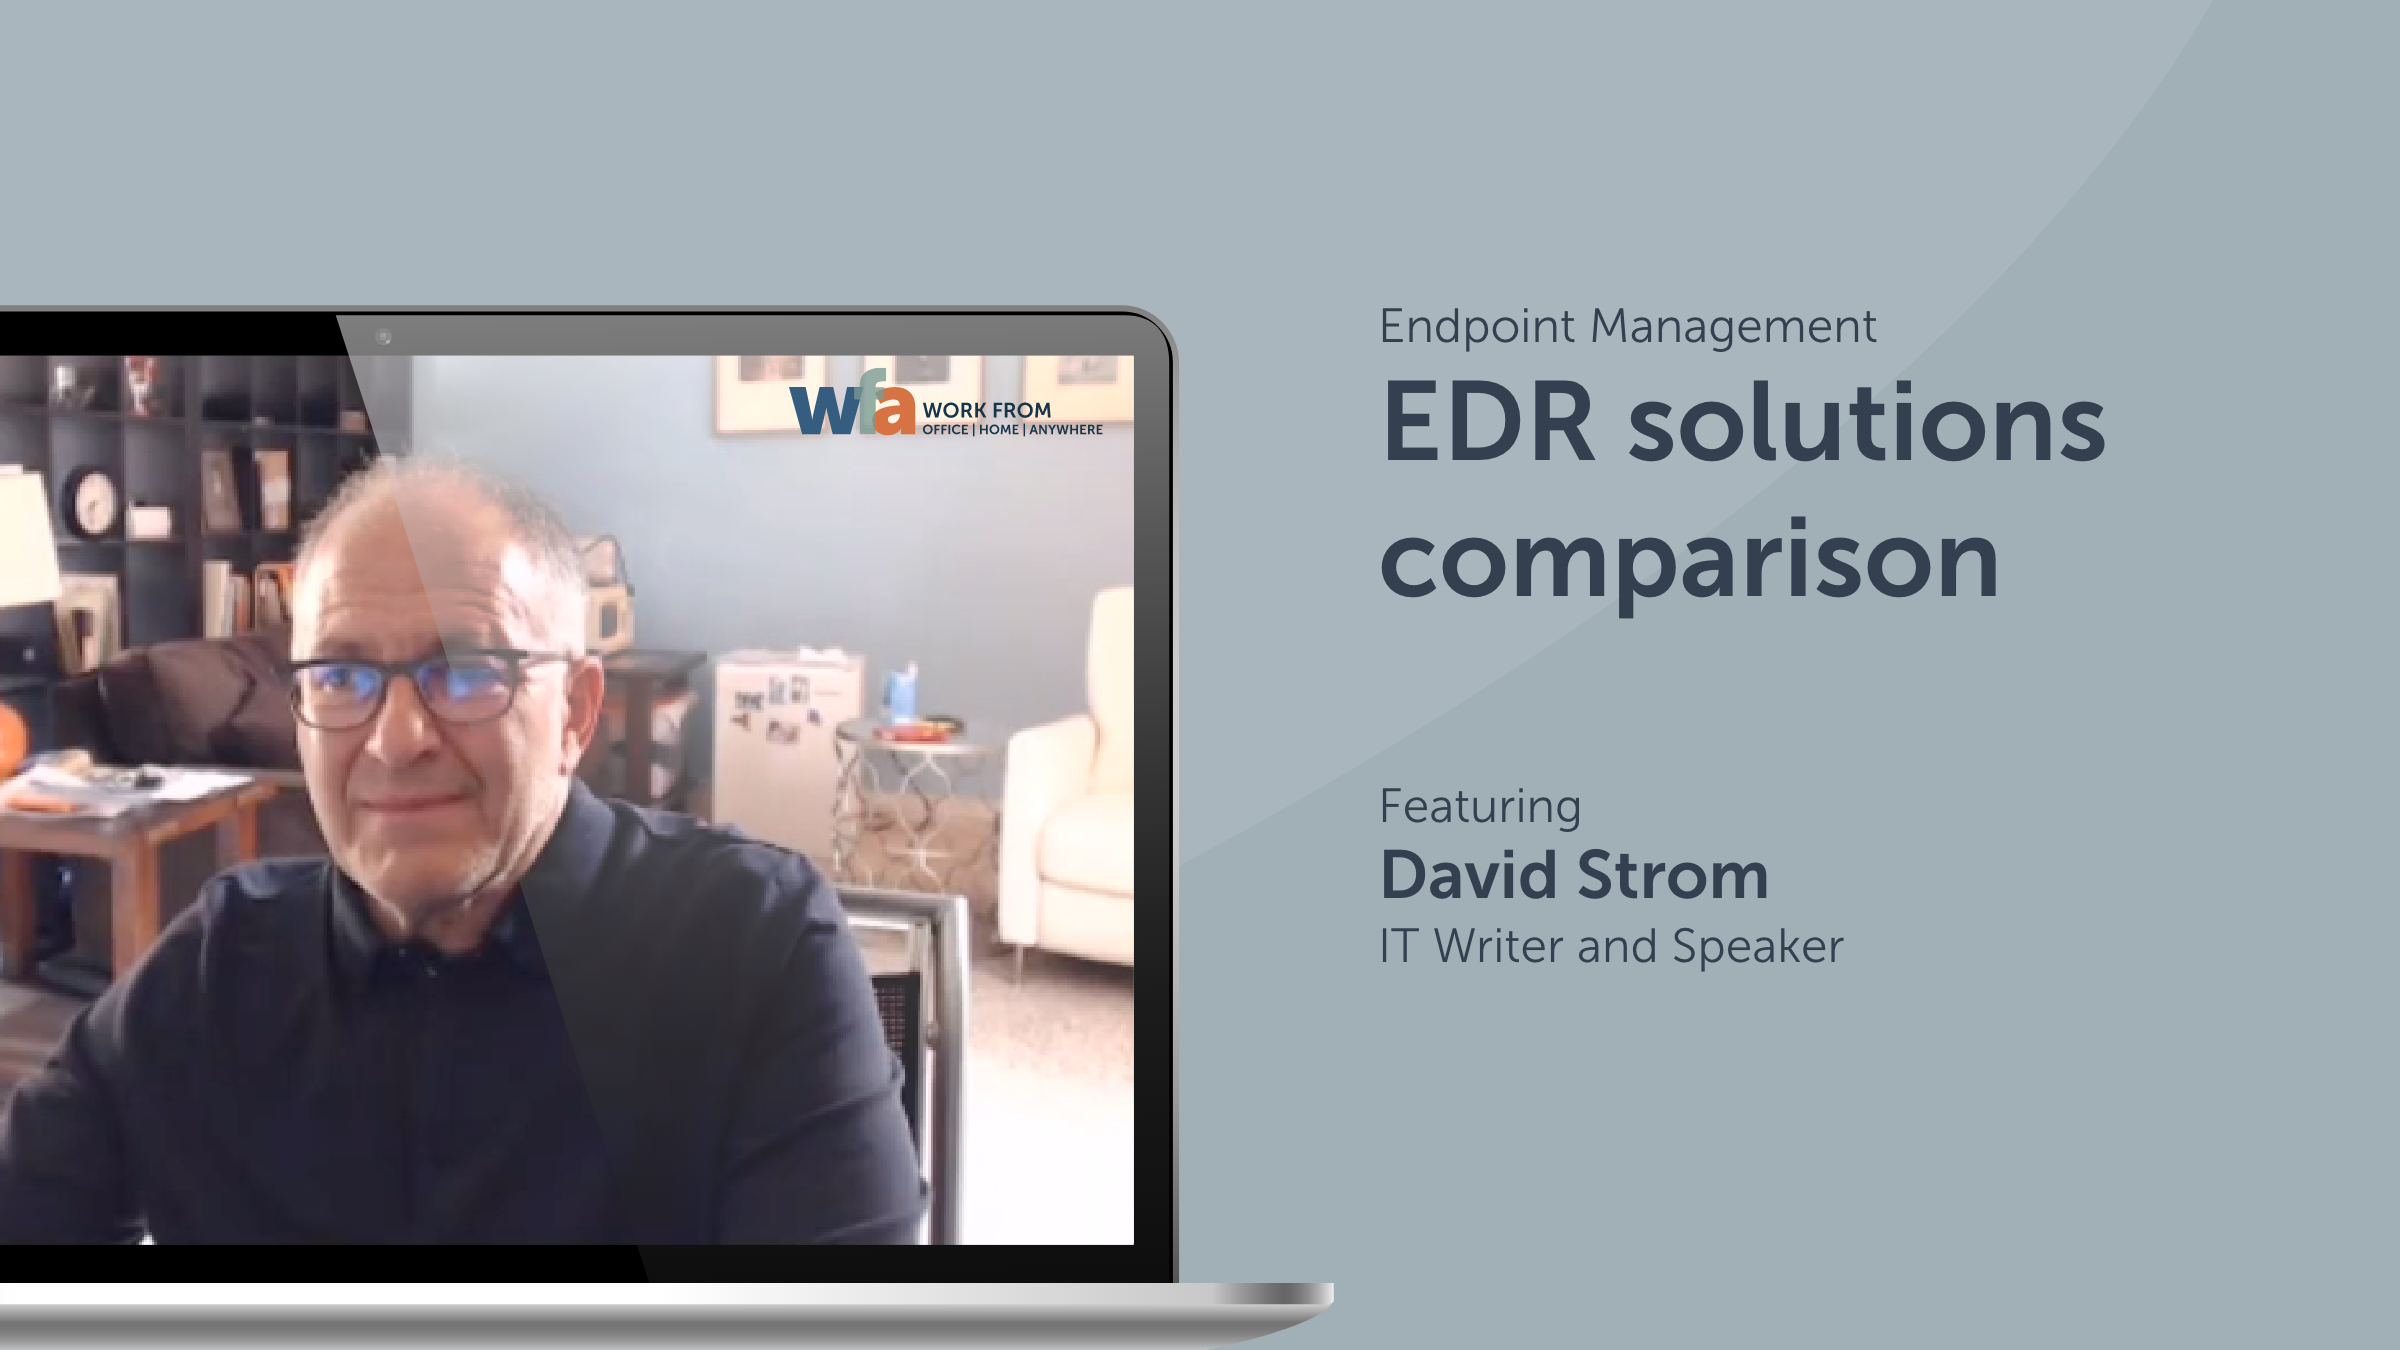 EDR solutions comparison with David Strom